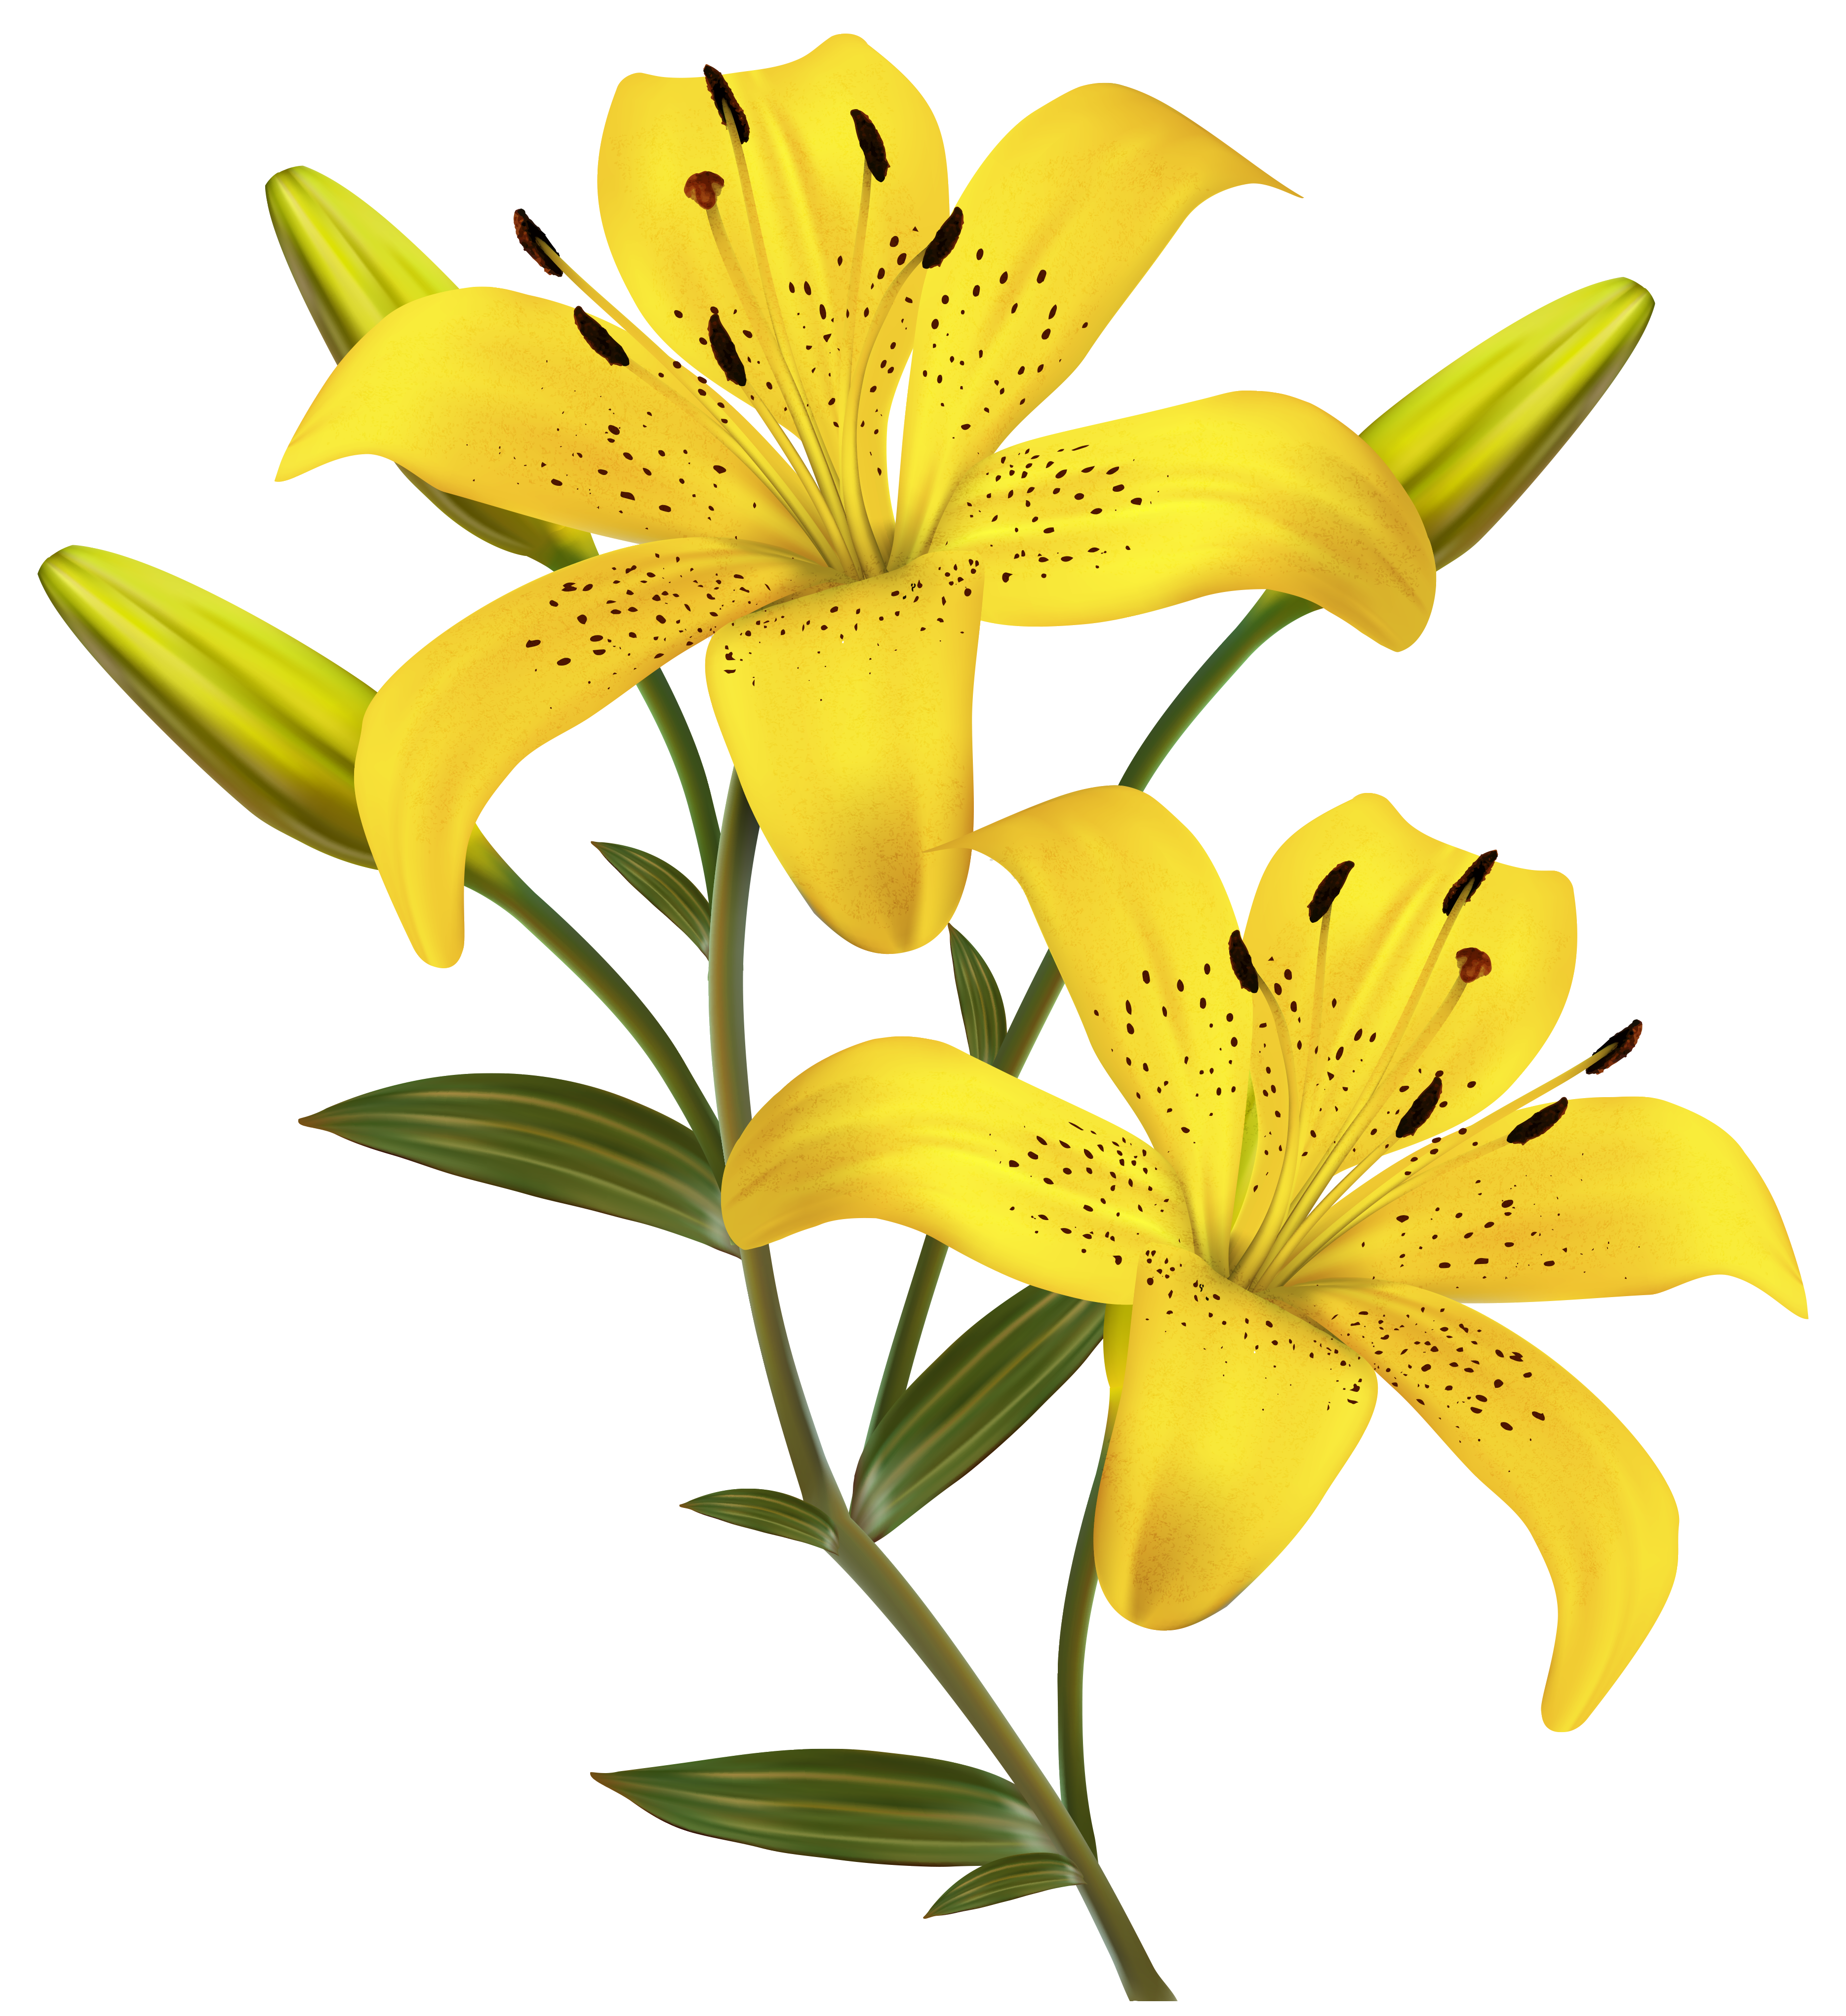 lily flower clipart - photo #32